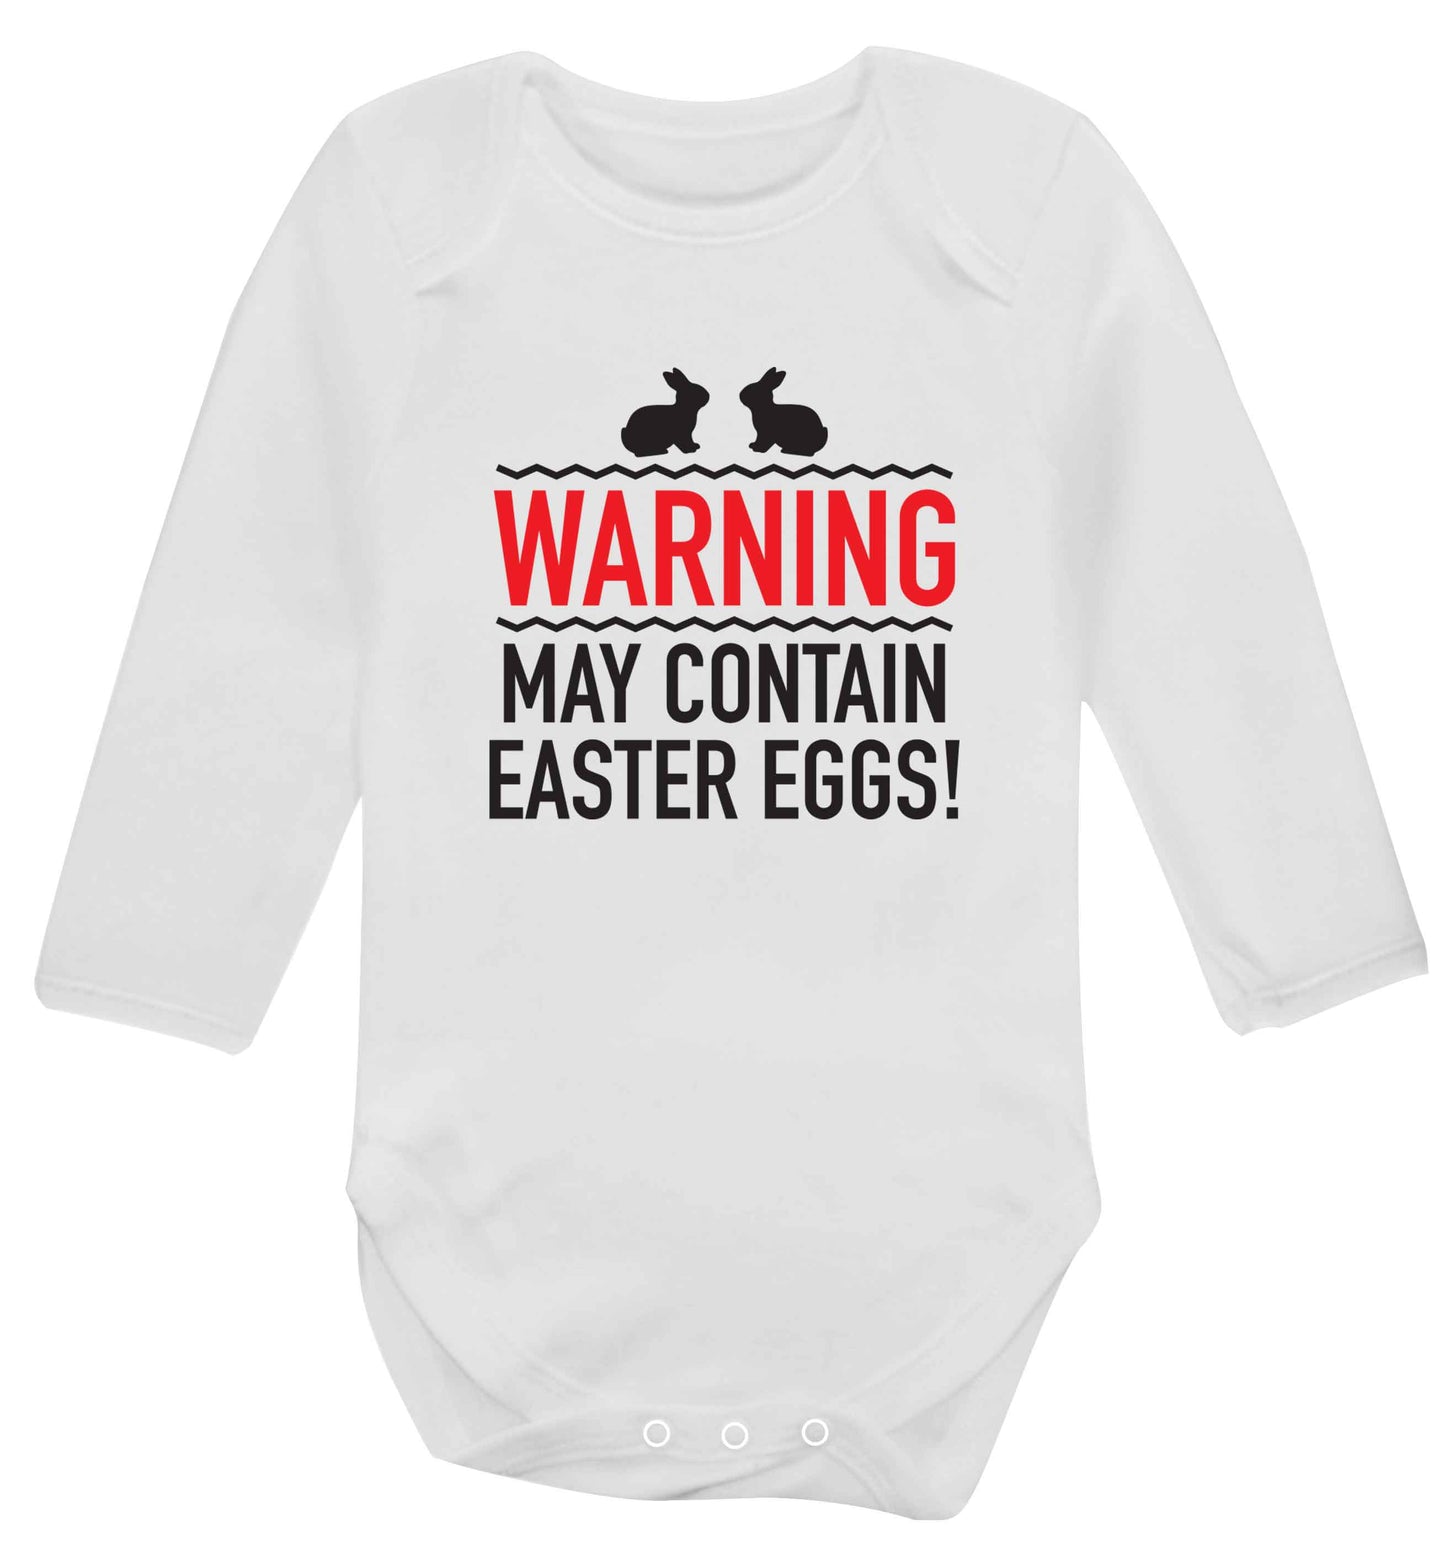 Warning may contain Easter eggs baby vest long sleeved white 6-12 months